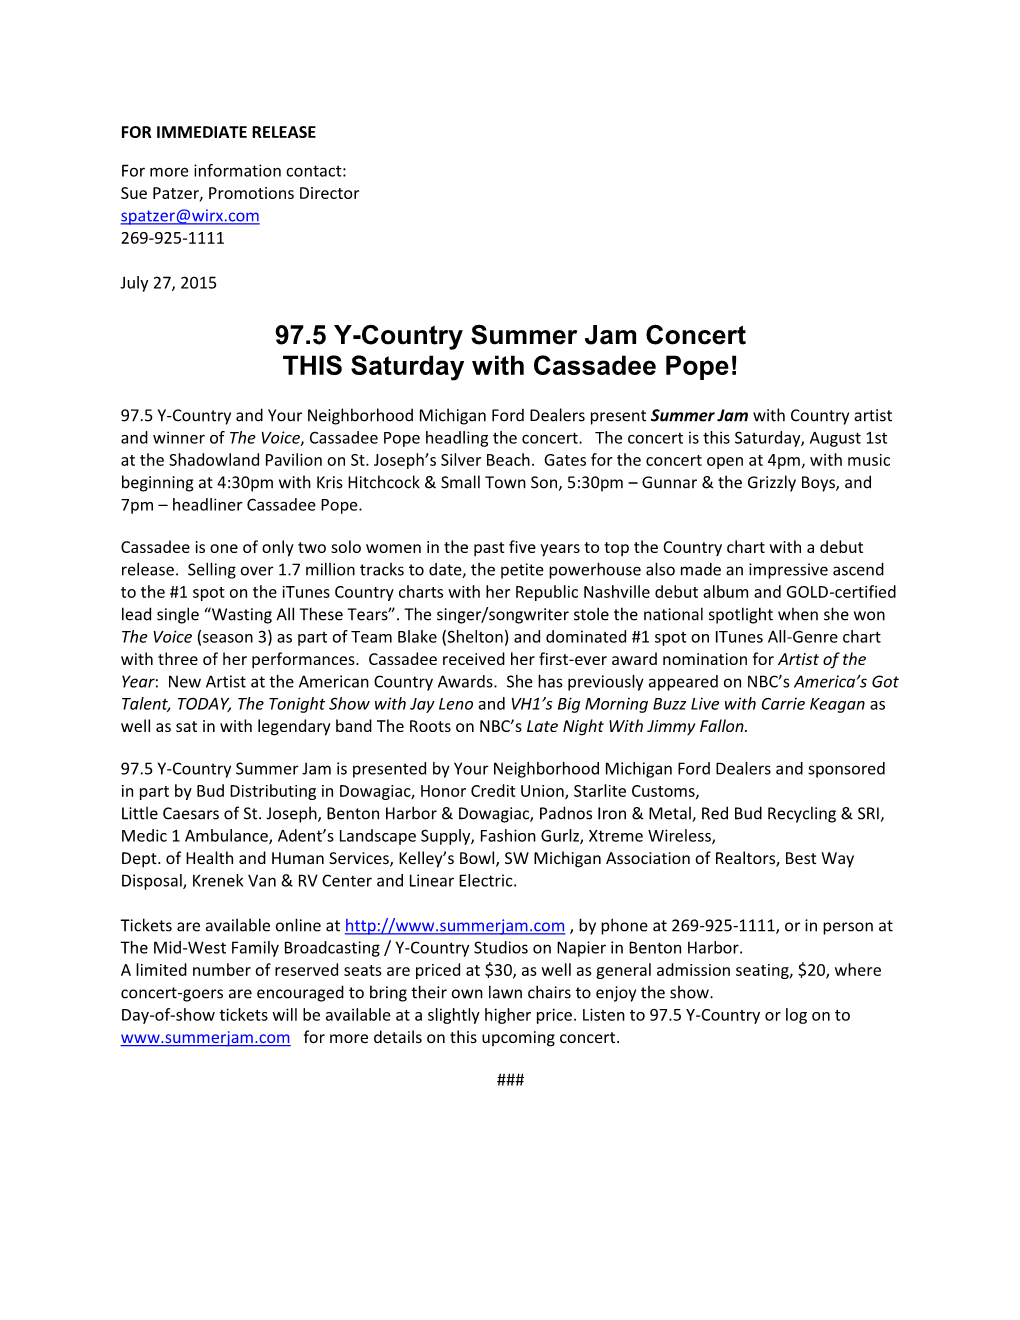 97.5 Y-Country Summer Jam Concert THIS Saturday with Cassadee Pope!